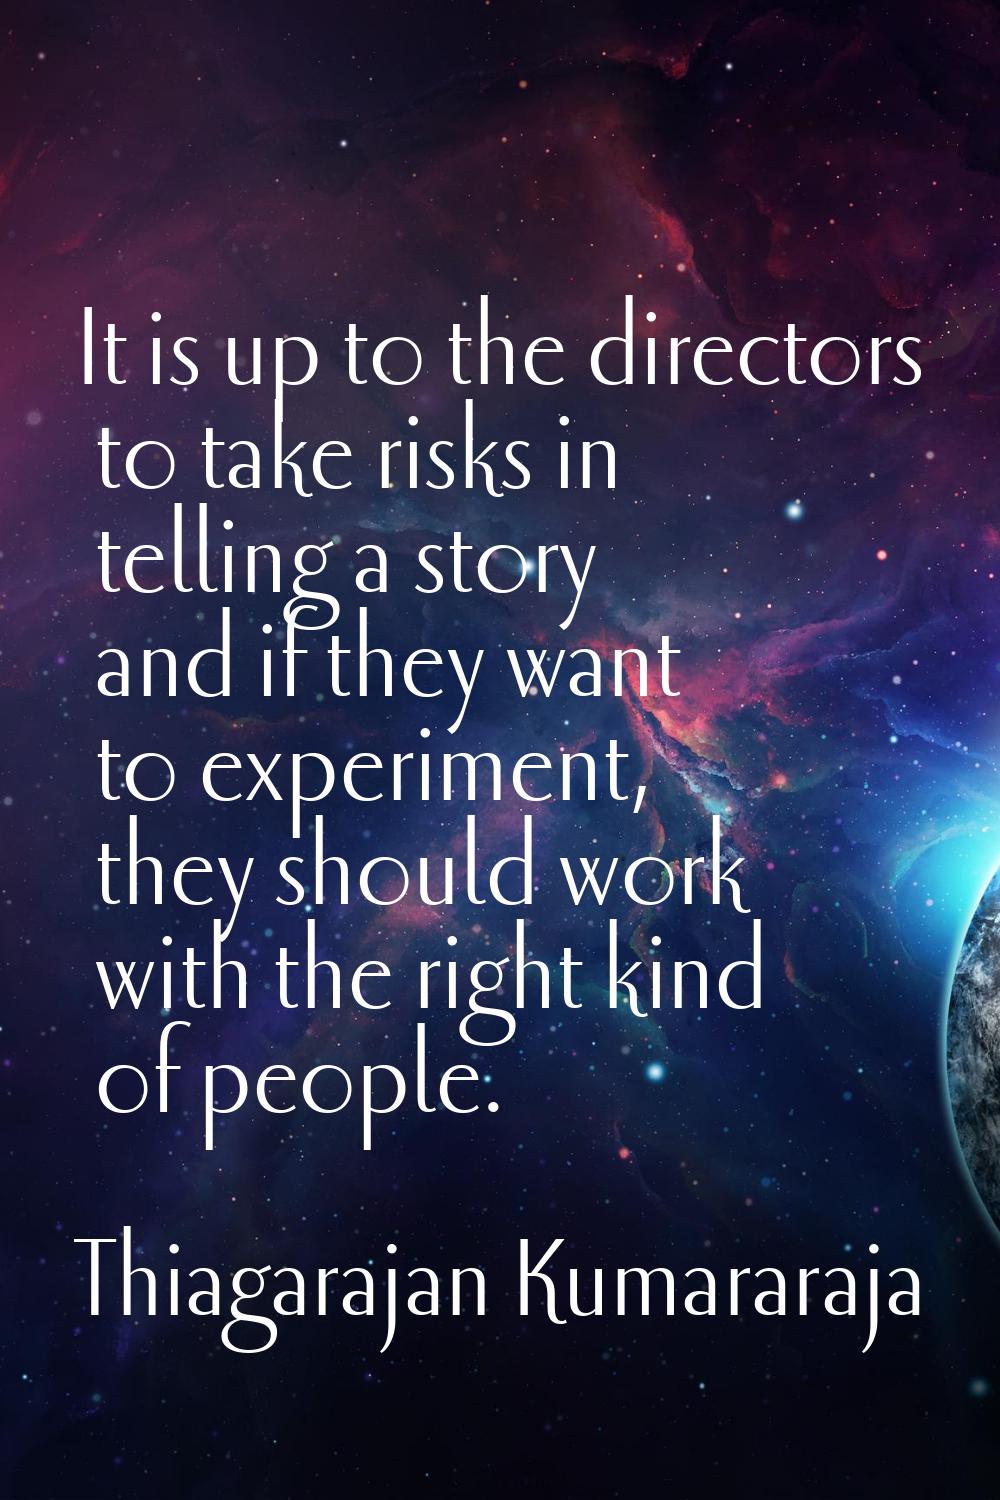 It is up to the directors to take risks in telling a story and if they want to experiment, they sho